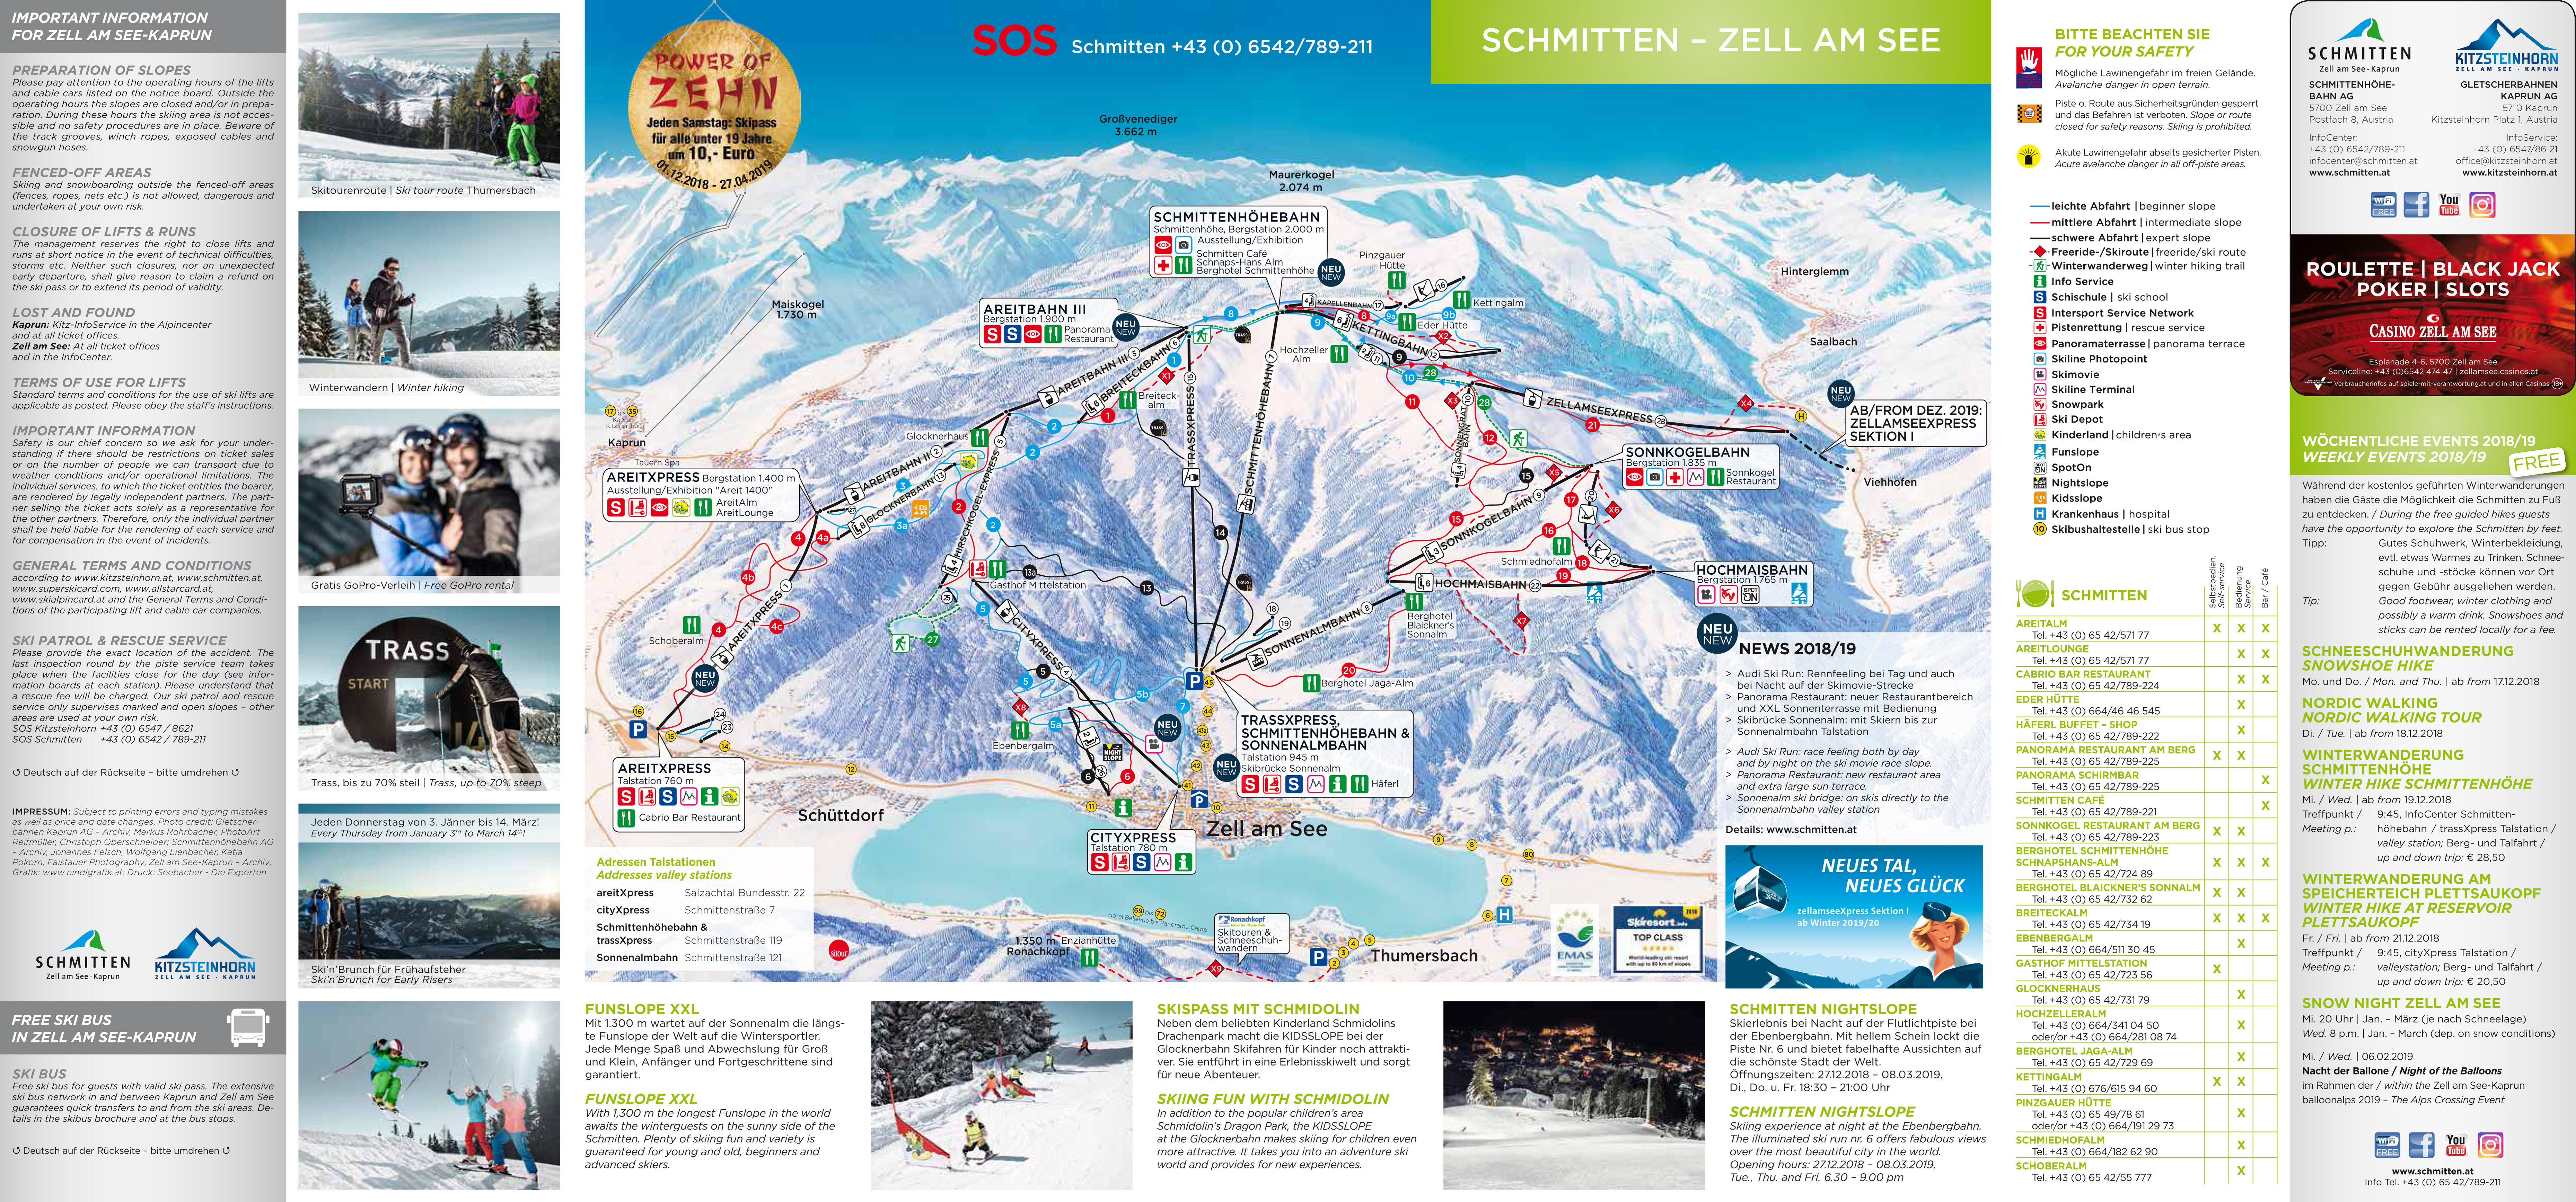 zell am see piste map Large Detailed Piste Map Of Zell Am See Schmitten Ski Resort zell am see piste map